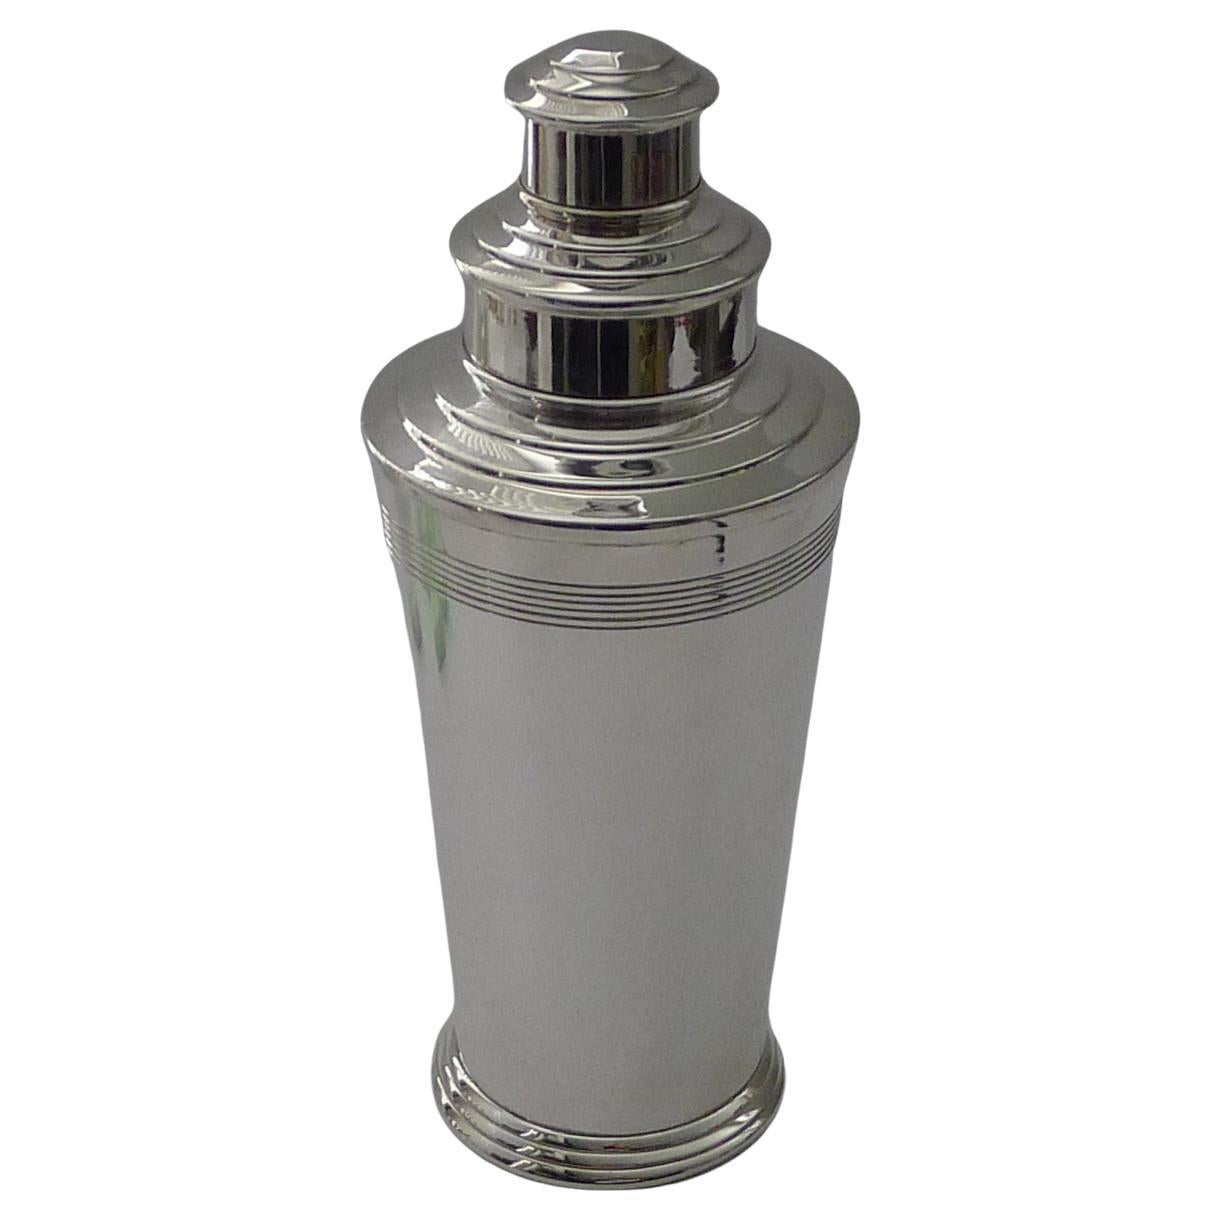 Iconic English Art Deco Cocktail Shaker by Barker Brothers